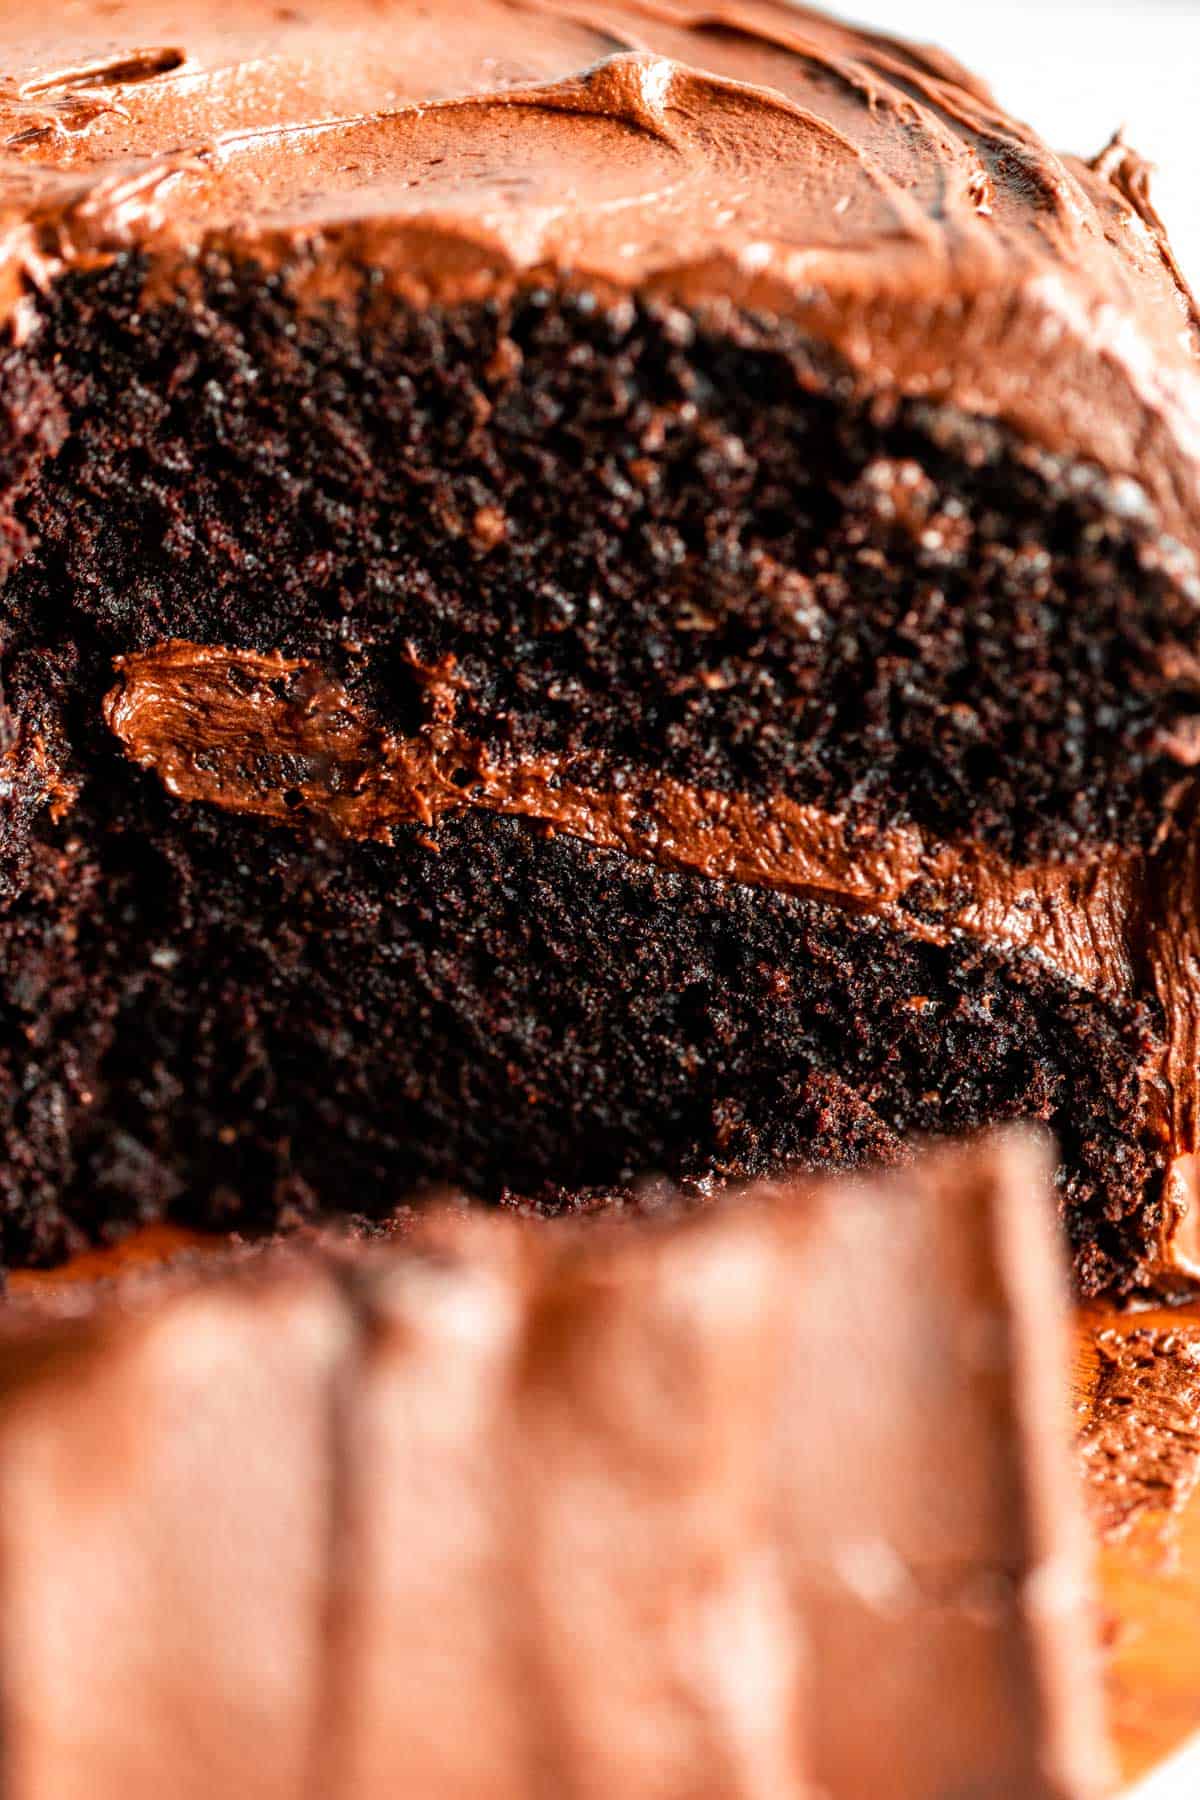 up close of the gluten free chocolate cake with chocolate buttercream frosting